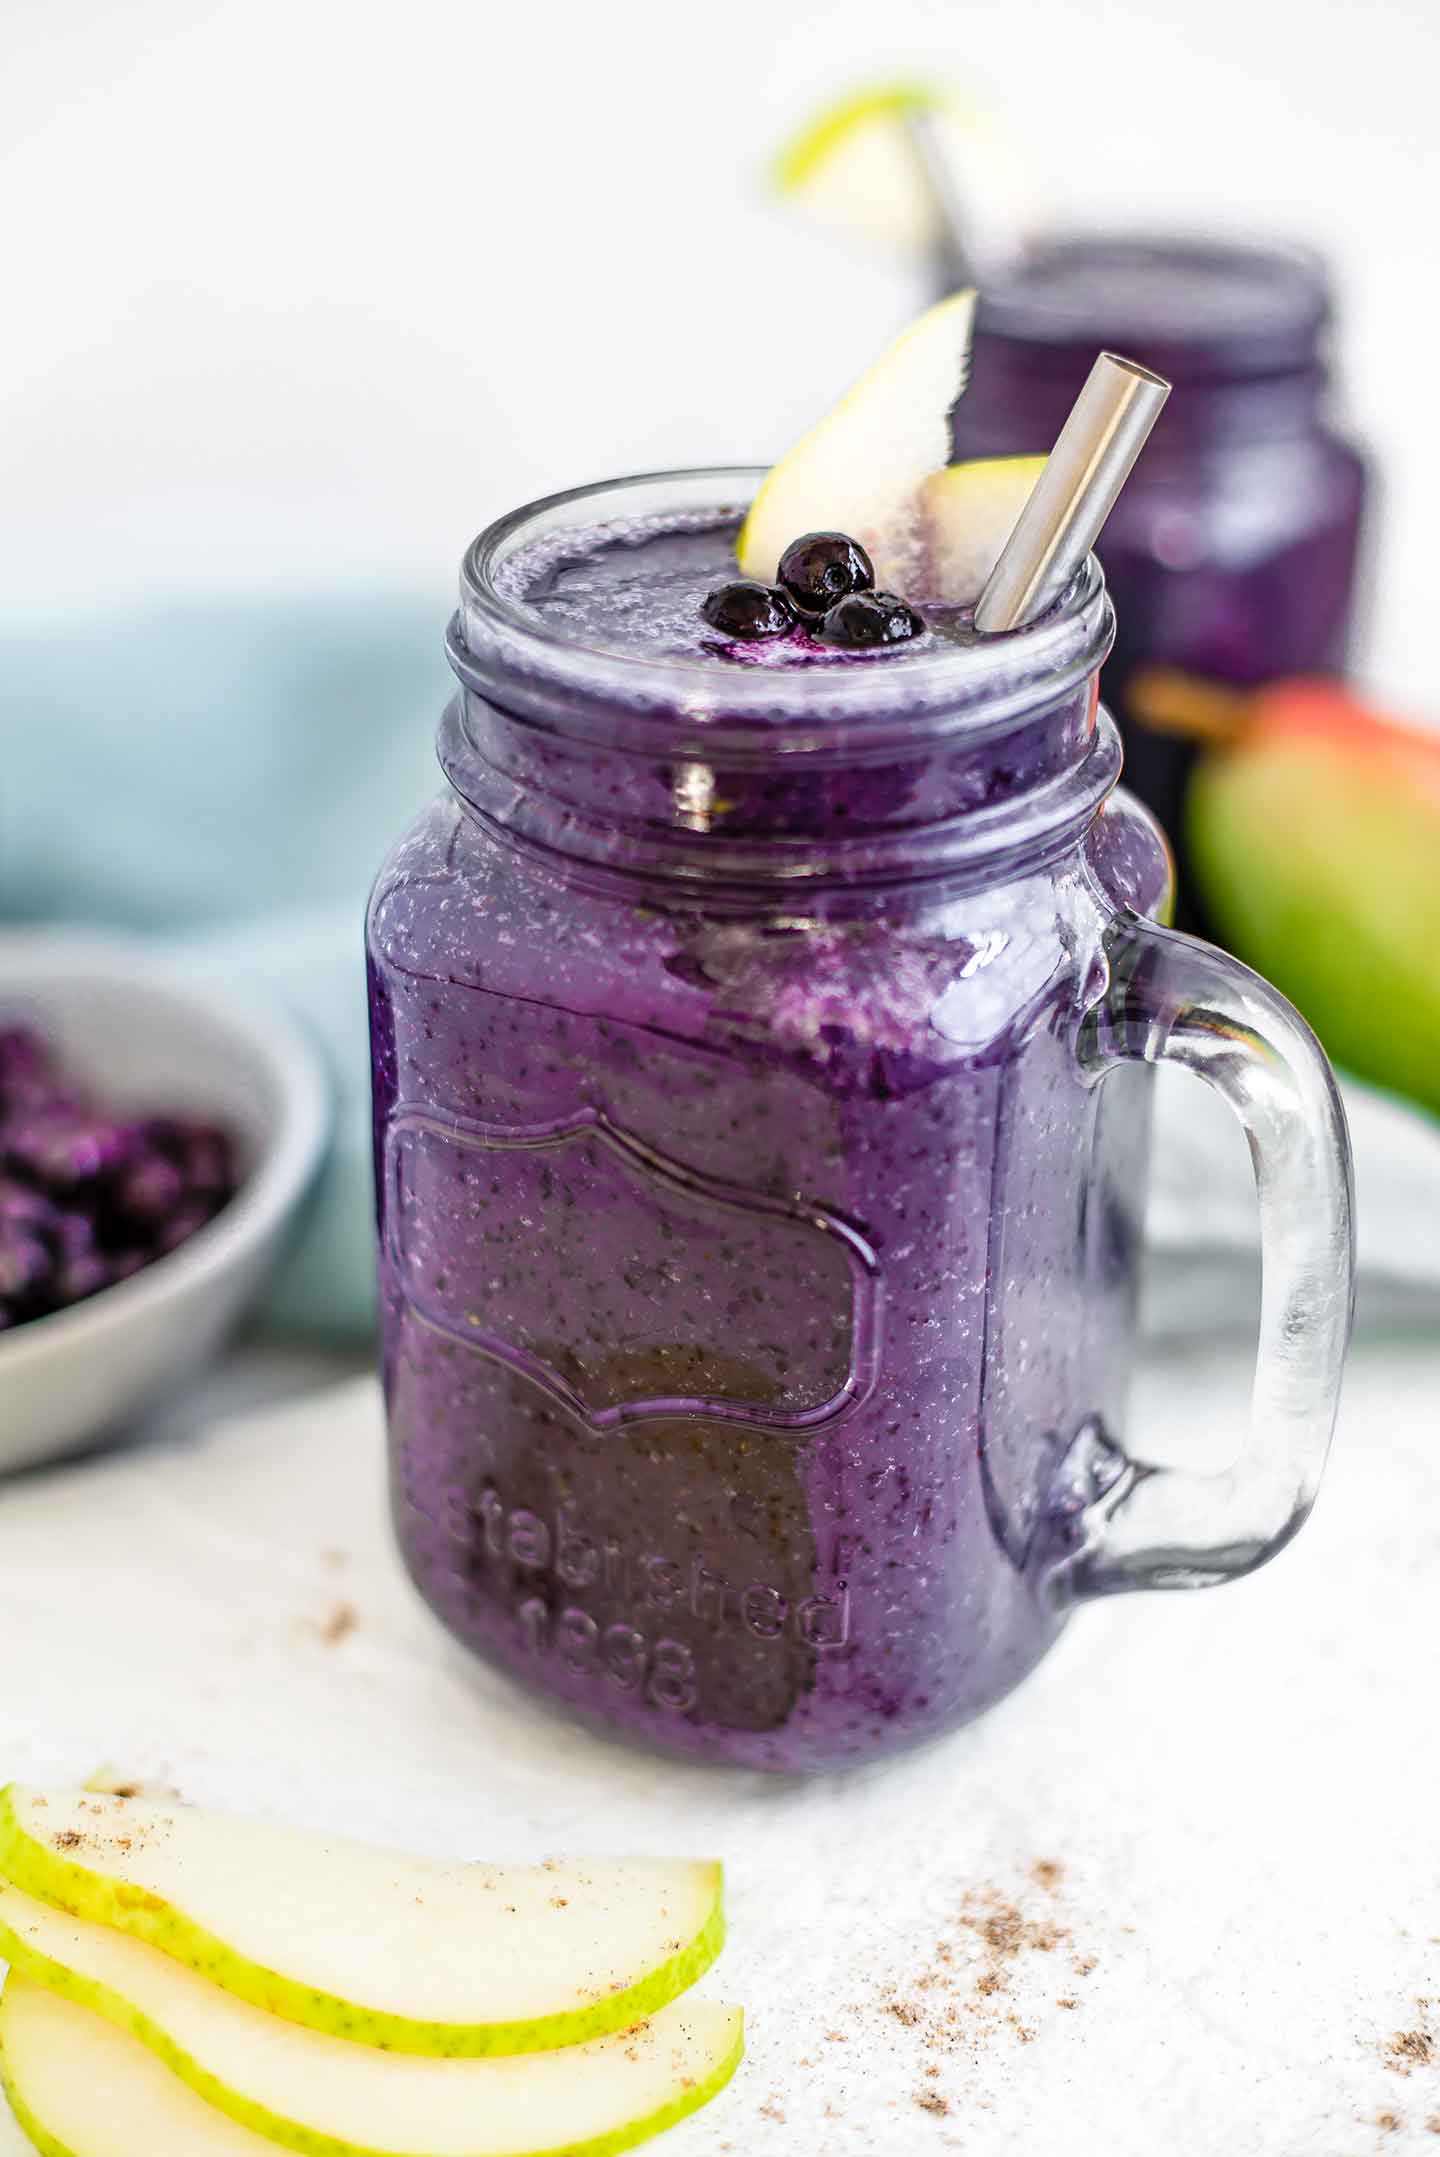 Side view of a deep purple blueberry pear smoothie in a glass jar with a handle. Slices of pear and fresh blueberries rest on top of the smoothie with a stainless steel straw.